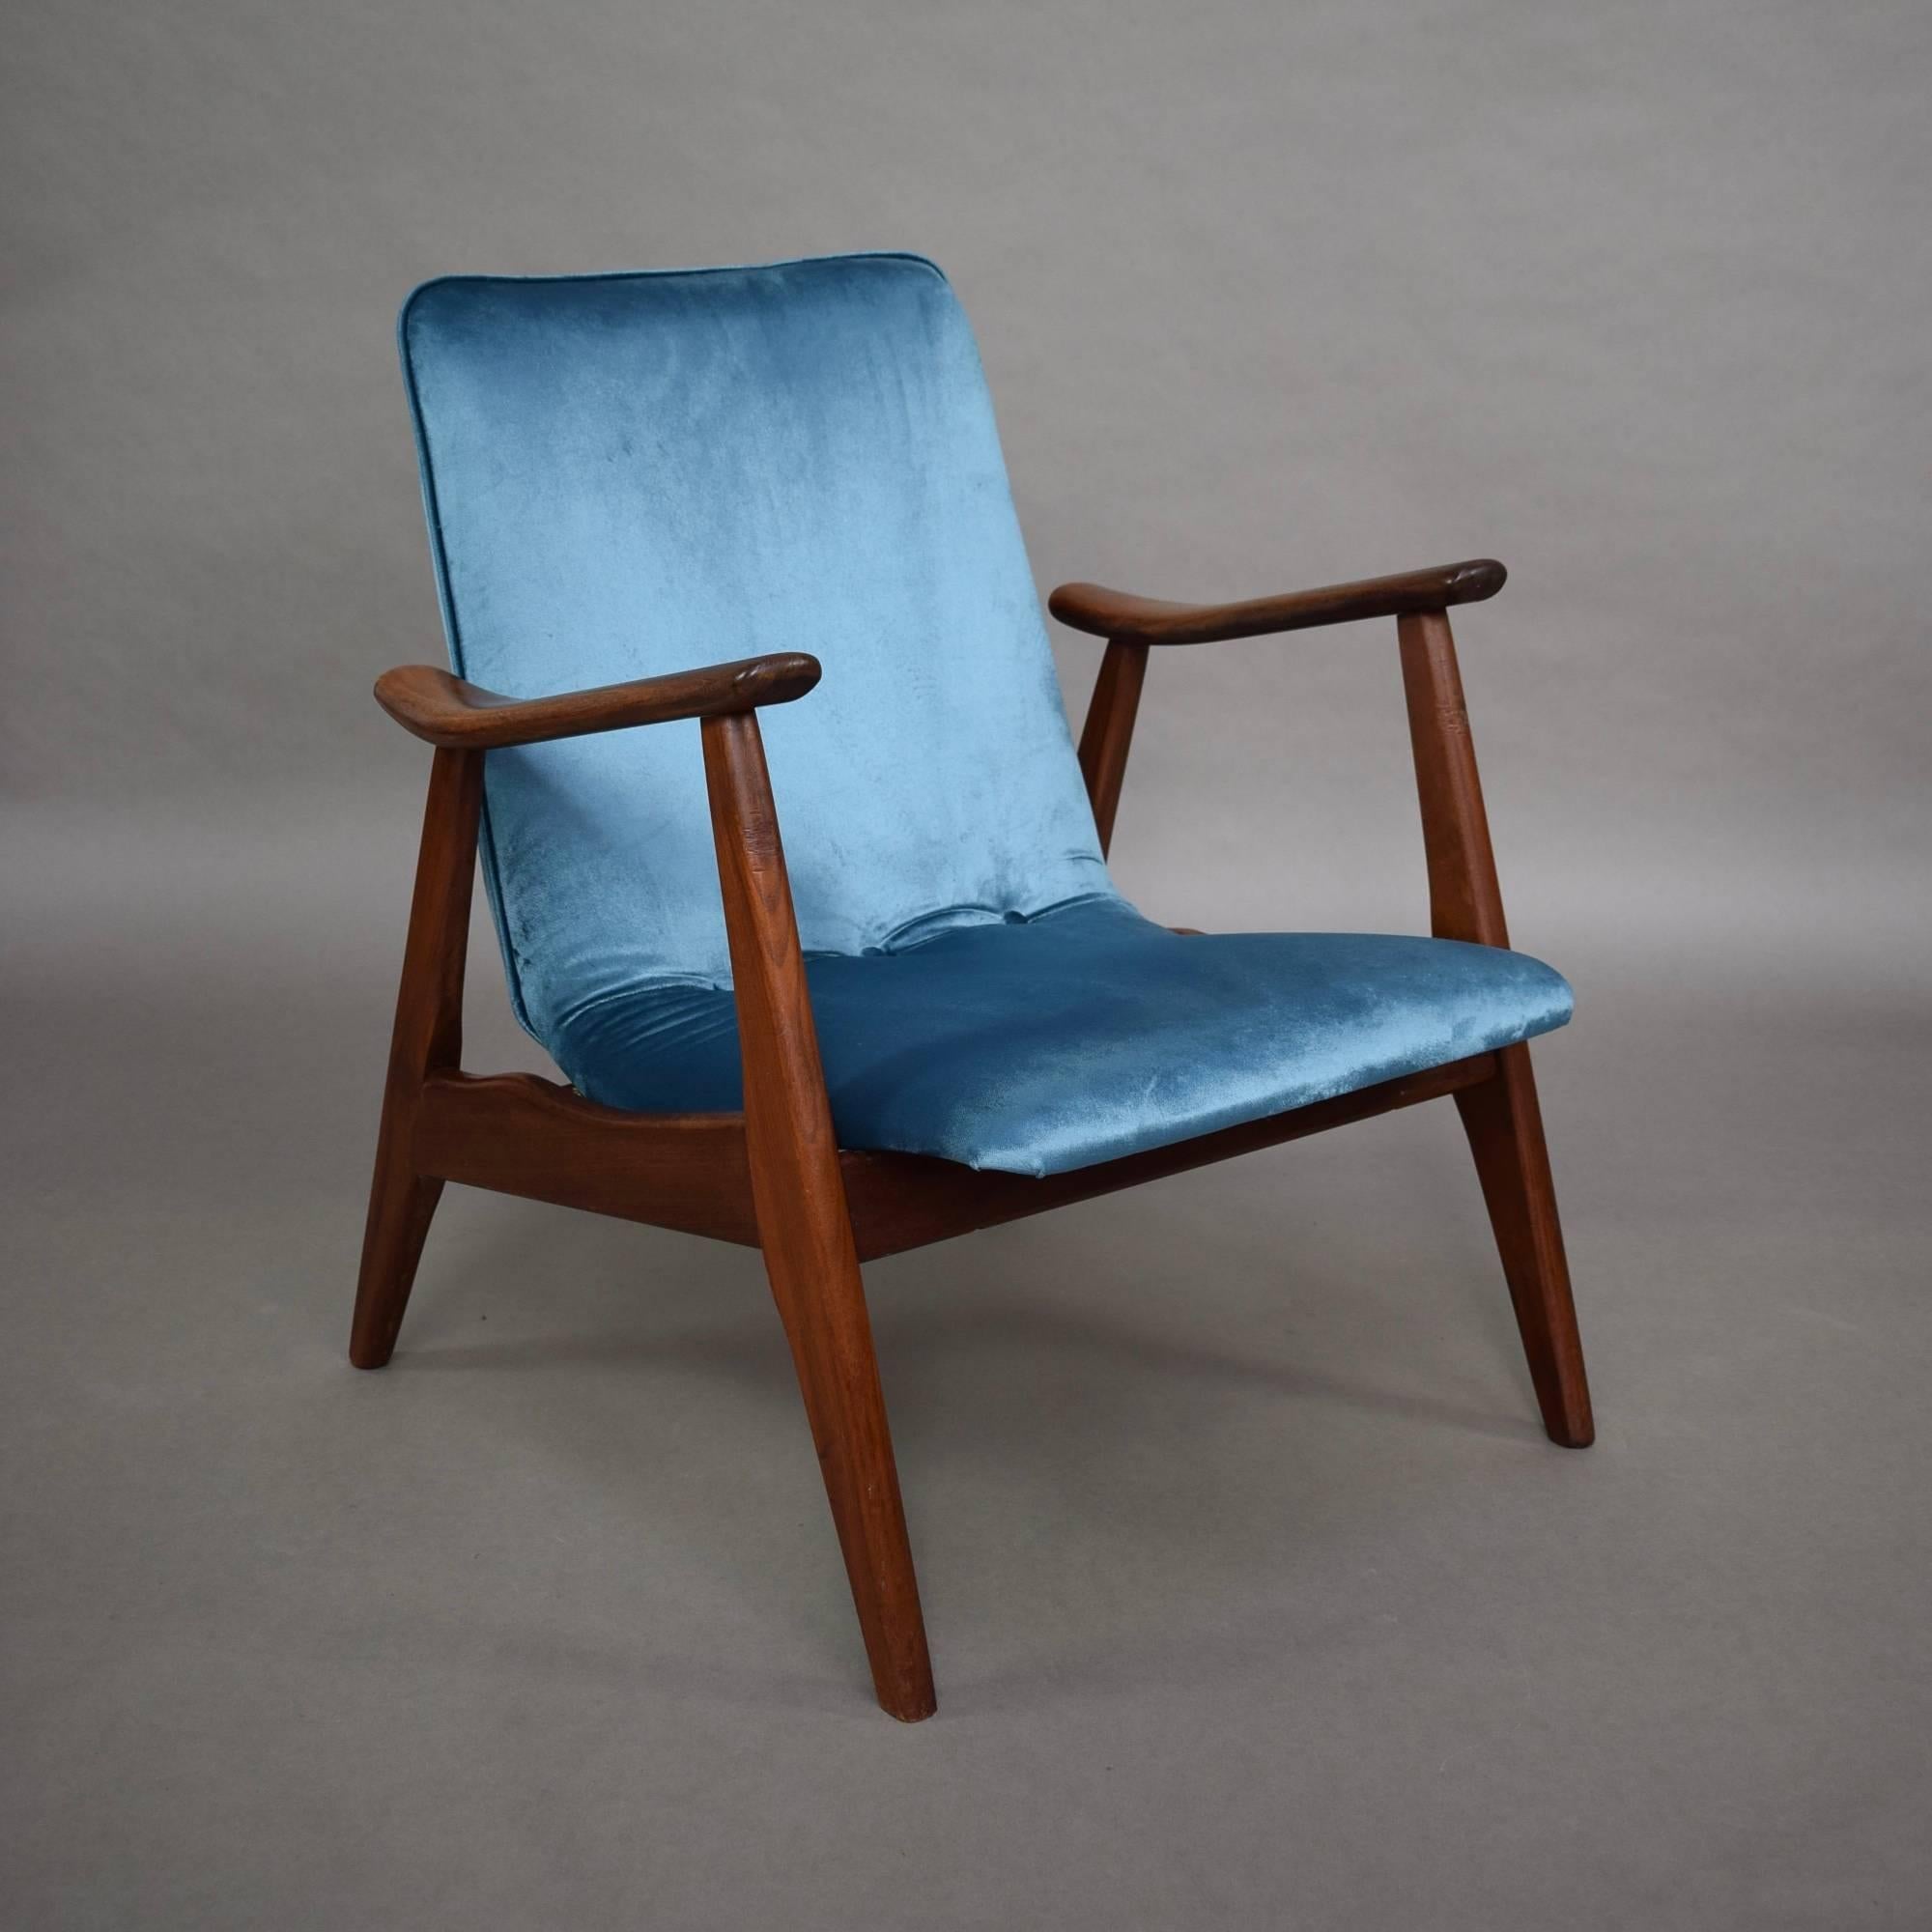 Beautiful pair of Dutch design lounge chair by Louis van Teeffelen, 1960s. The chairs are made of solid Teak and are reupholstered with a beautiful trendy petrol blue velvet fabric. 
We have multiple chairs available (in different colors).
It is